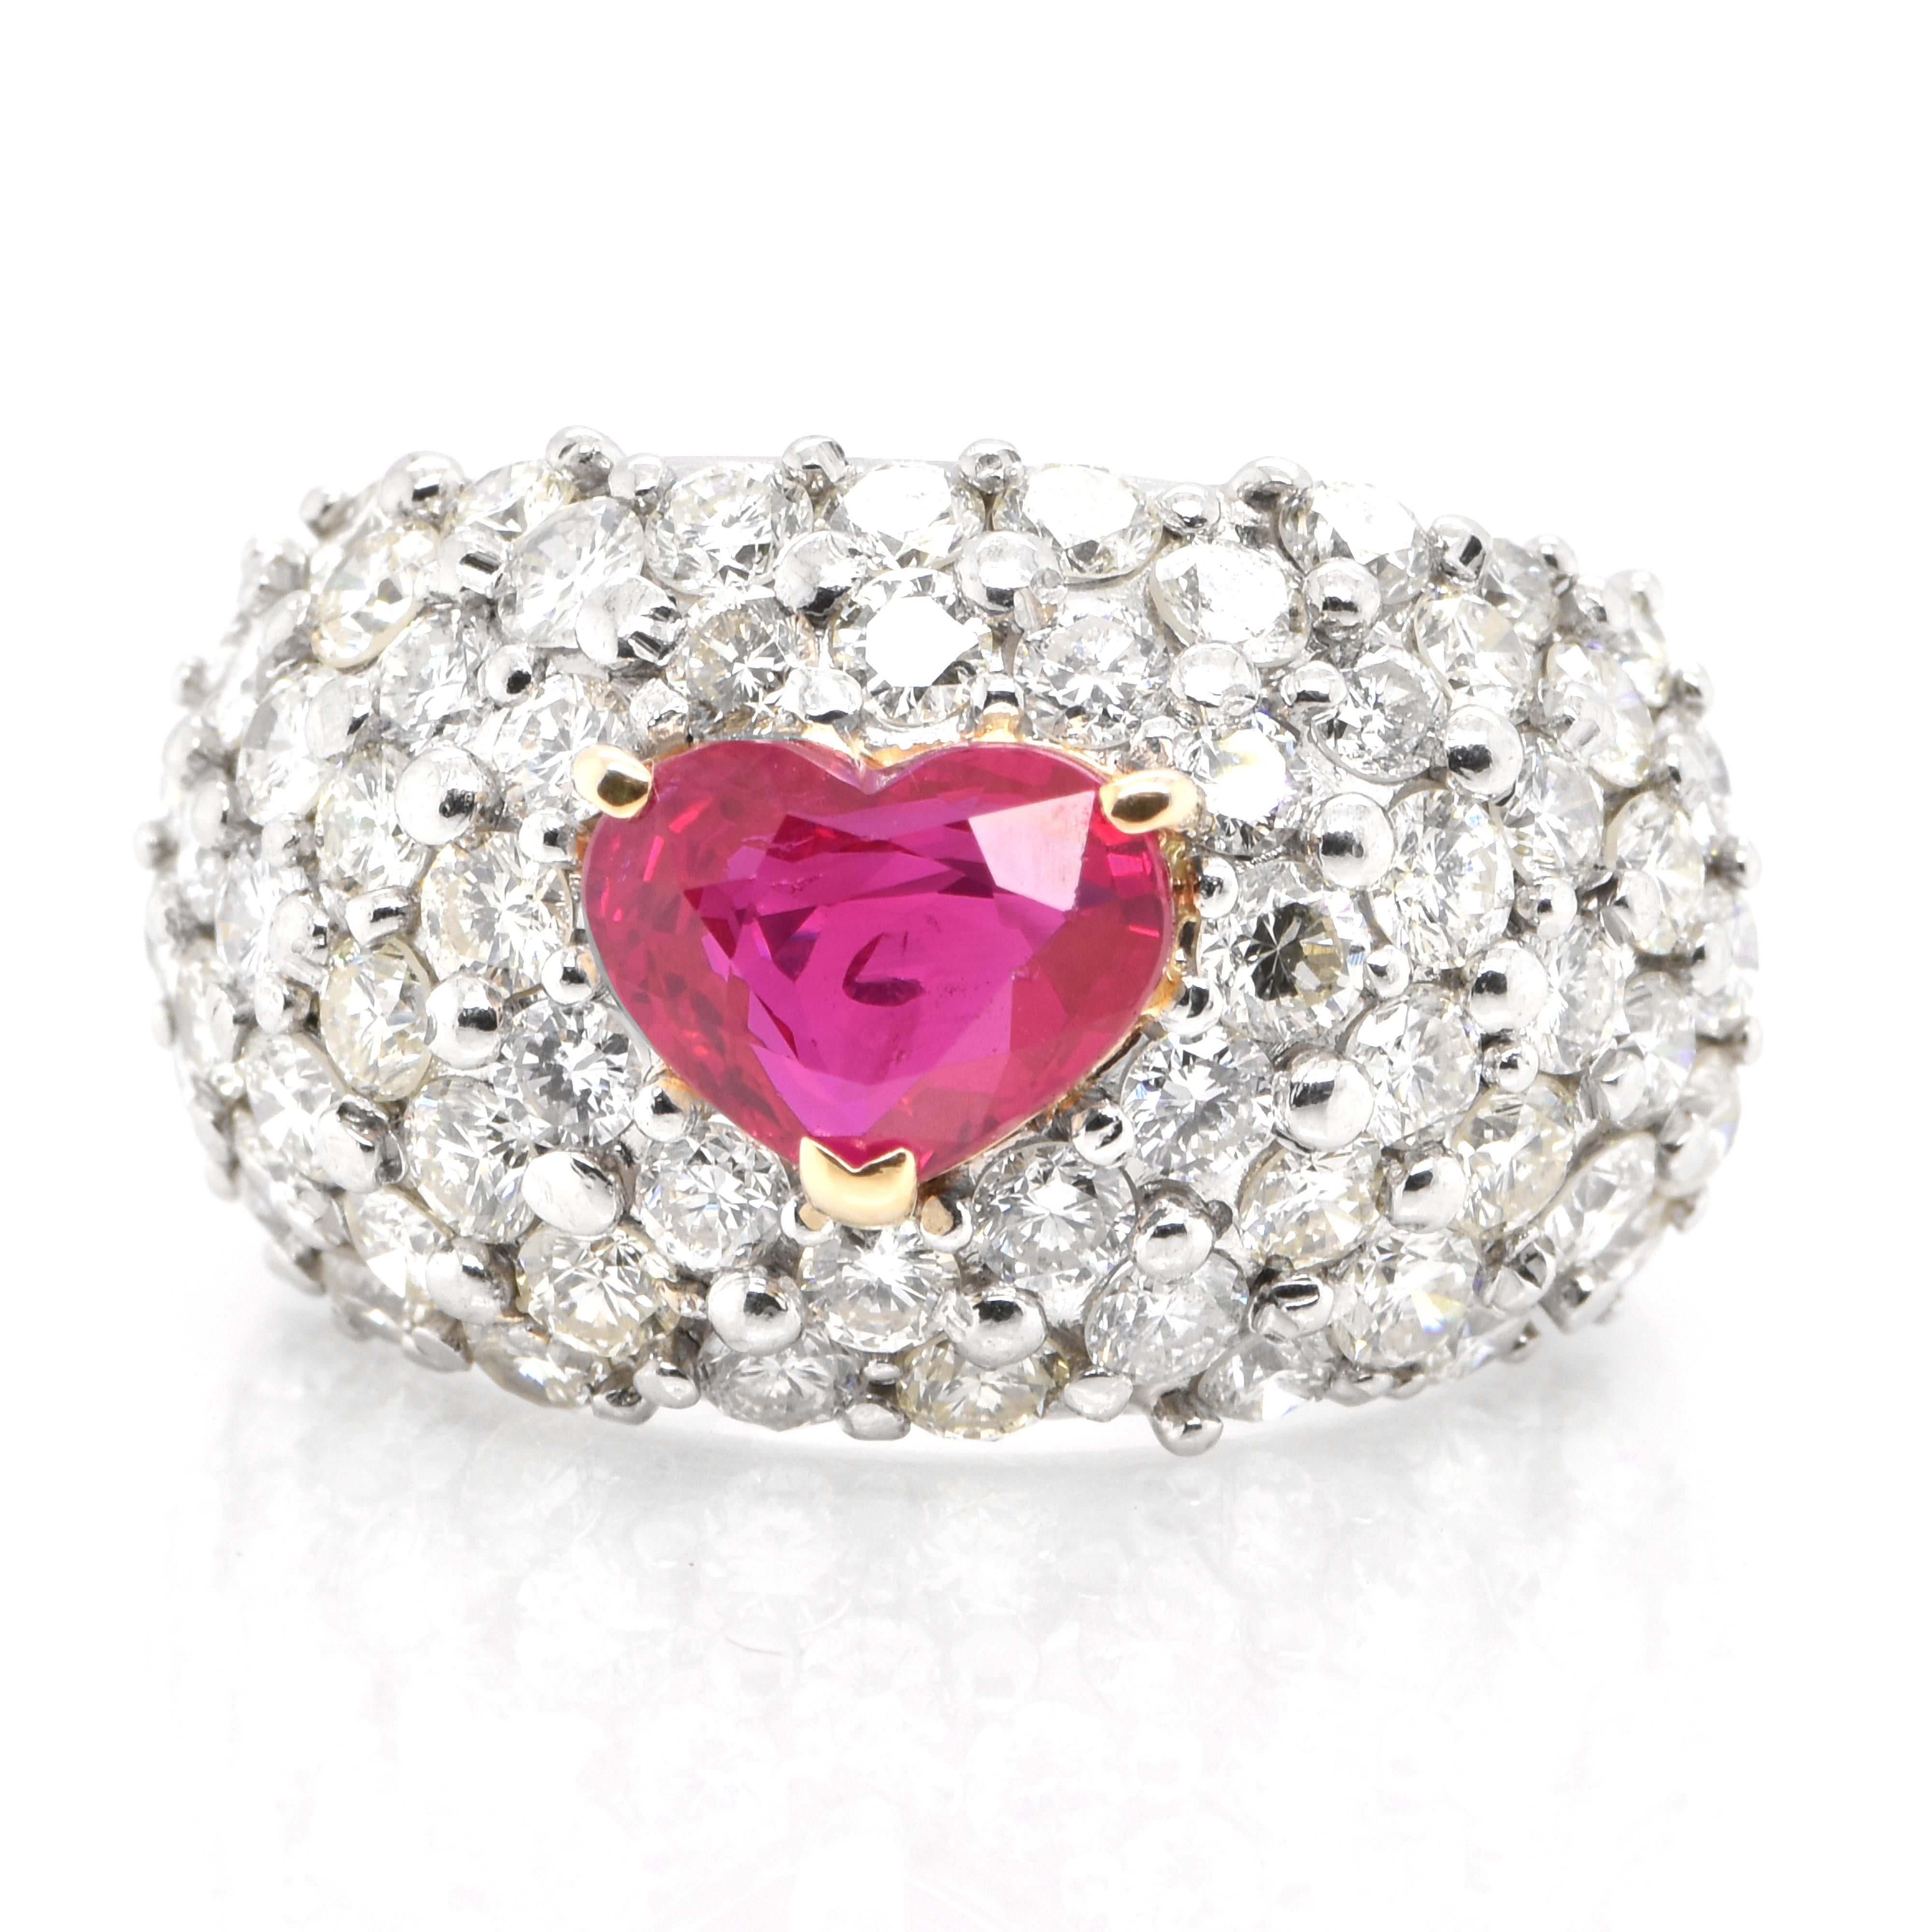 A beautiful ring set in Platinum and 18K Gold featuring a GIA Certified 2.106 Carat Natural Burmese Ruby and 3.682 Carat Diamonds. Rubies are referred to as 